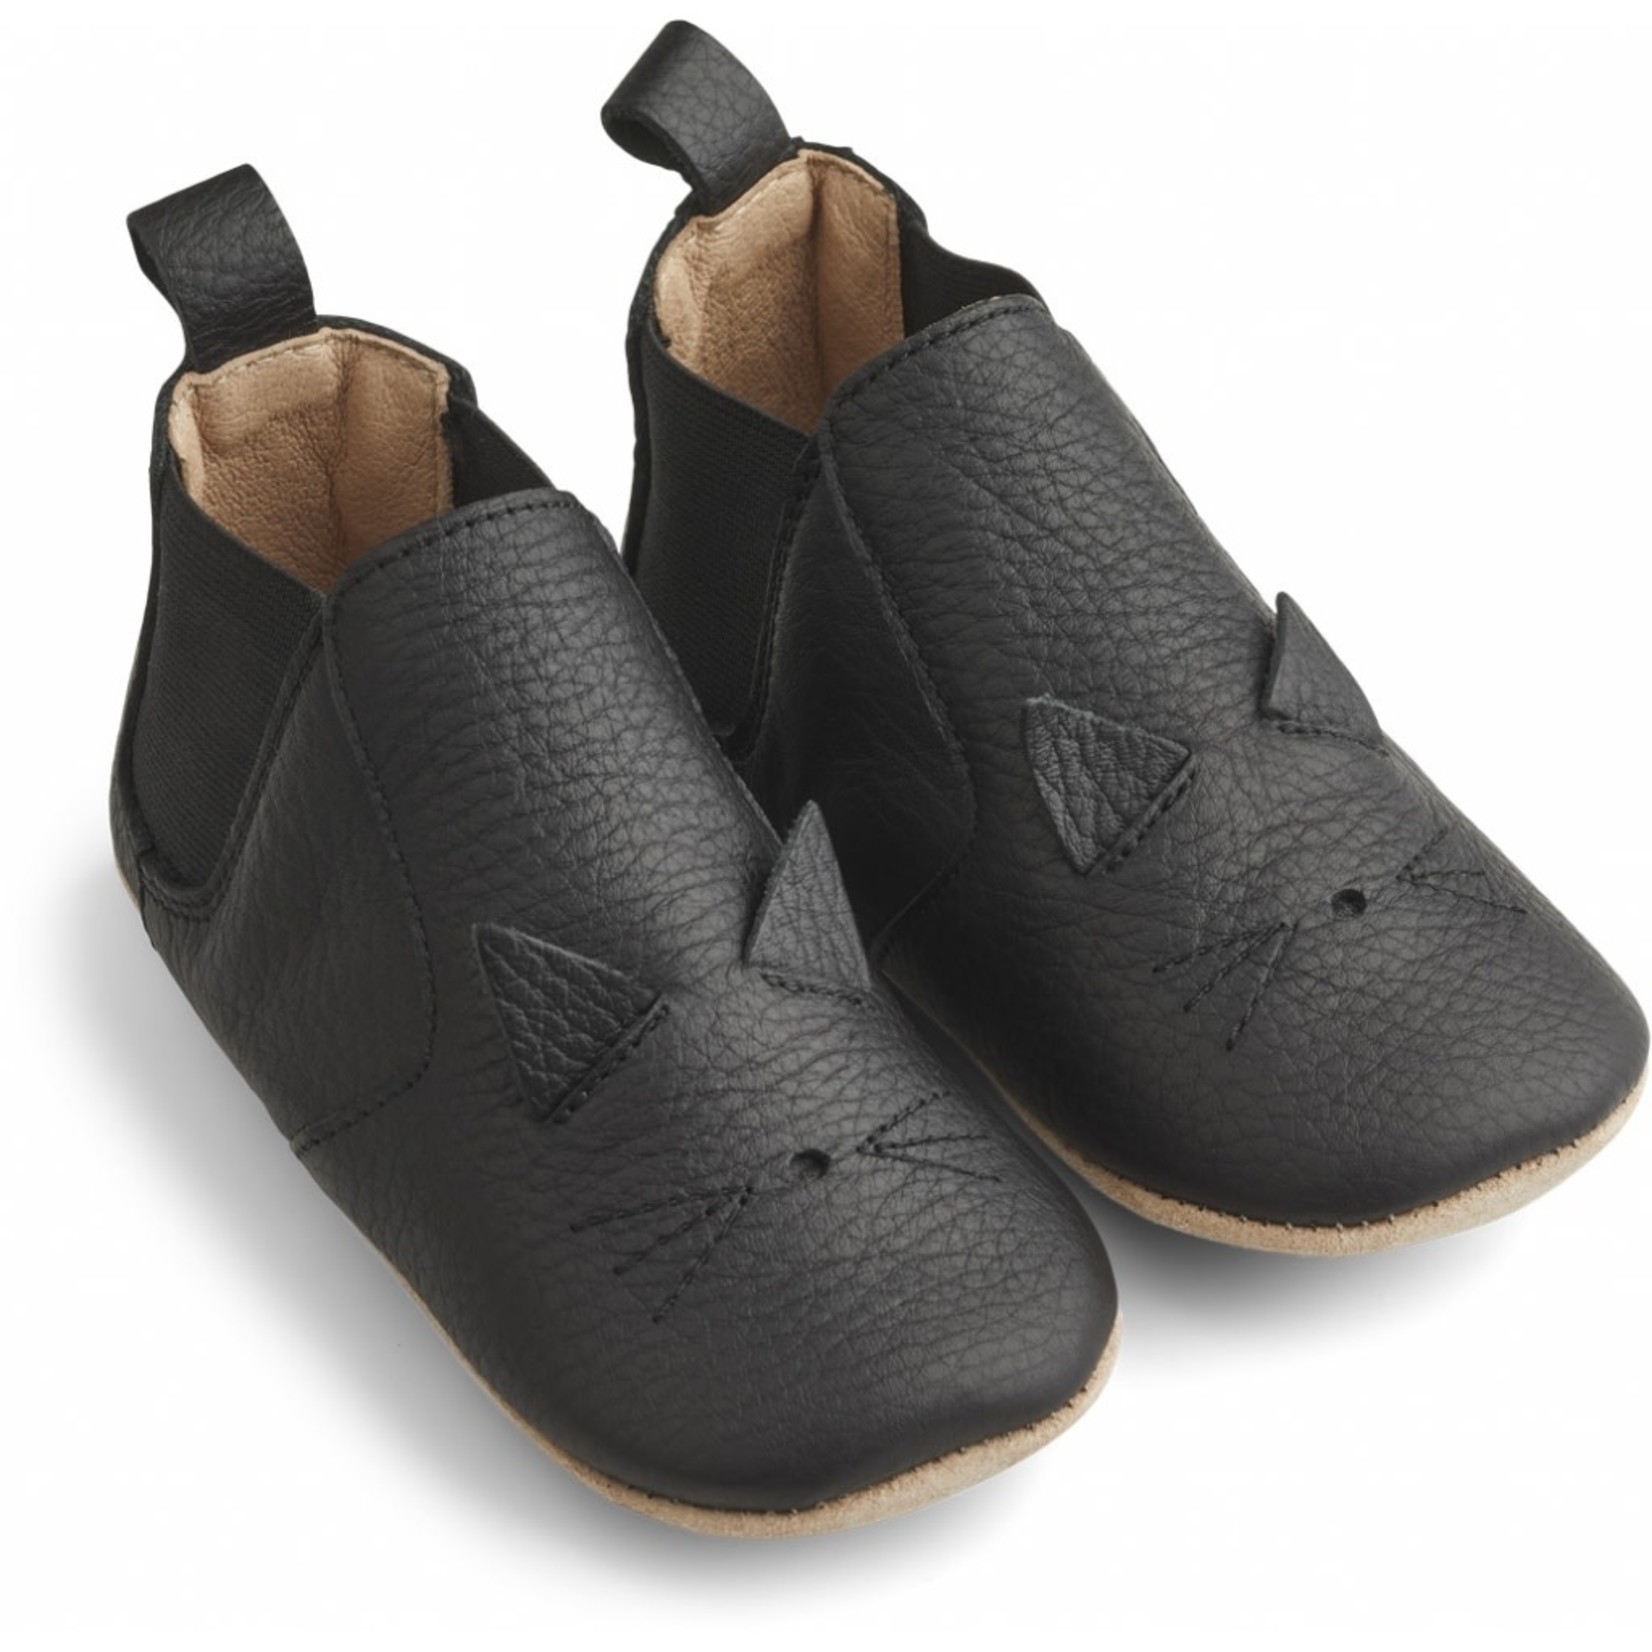 liewood Liewood-AW21 LW13037 Edith leather slippers 100% leather